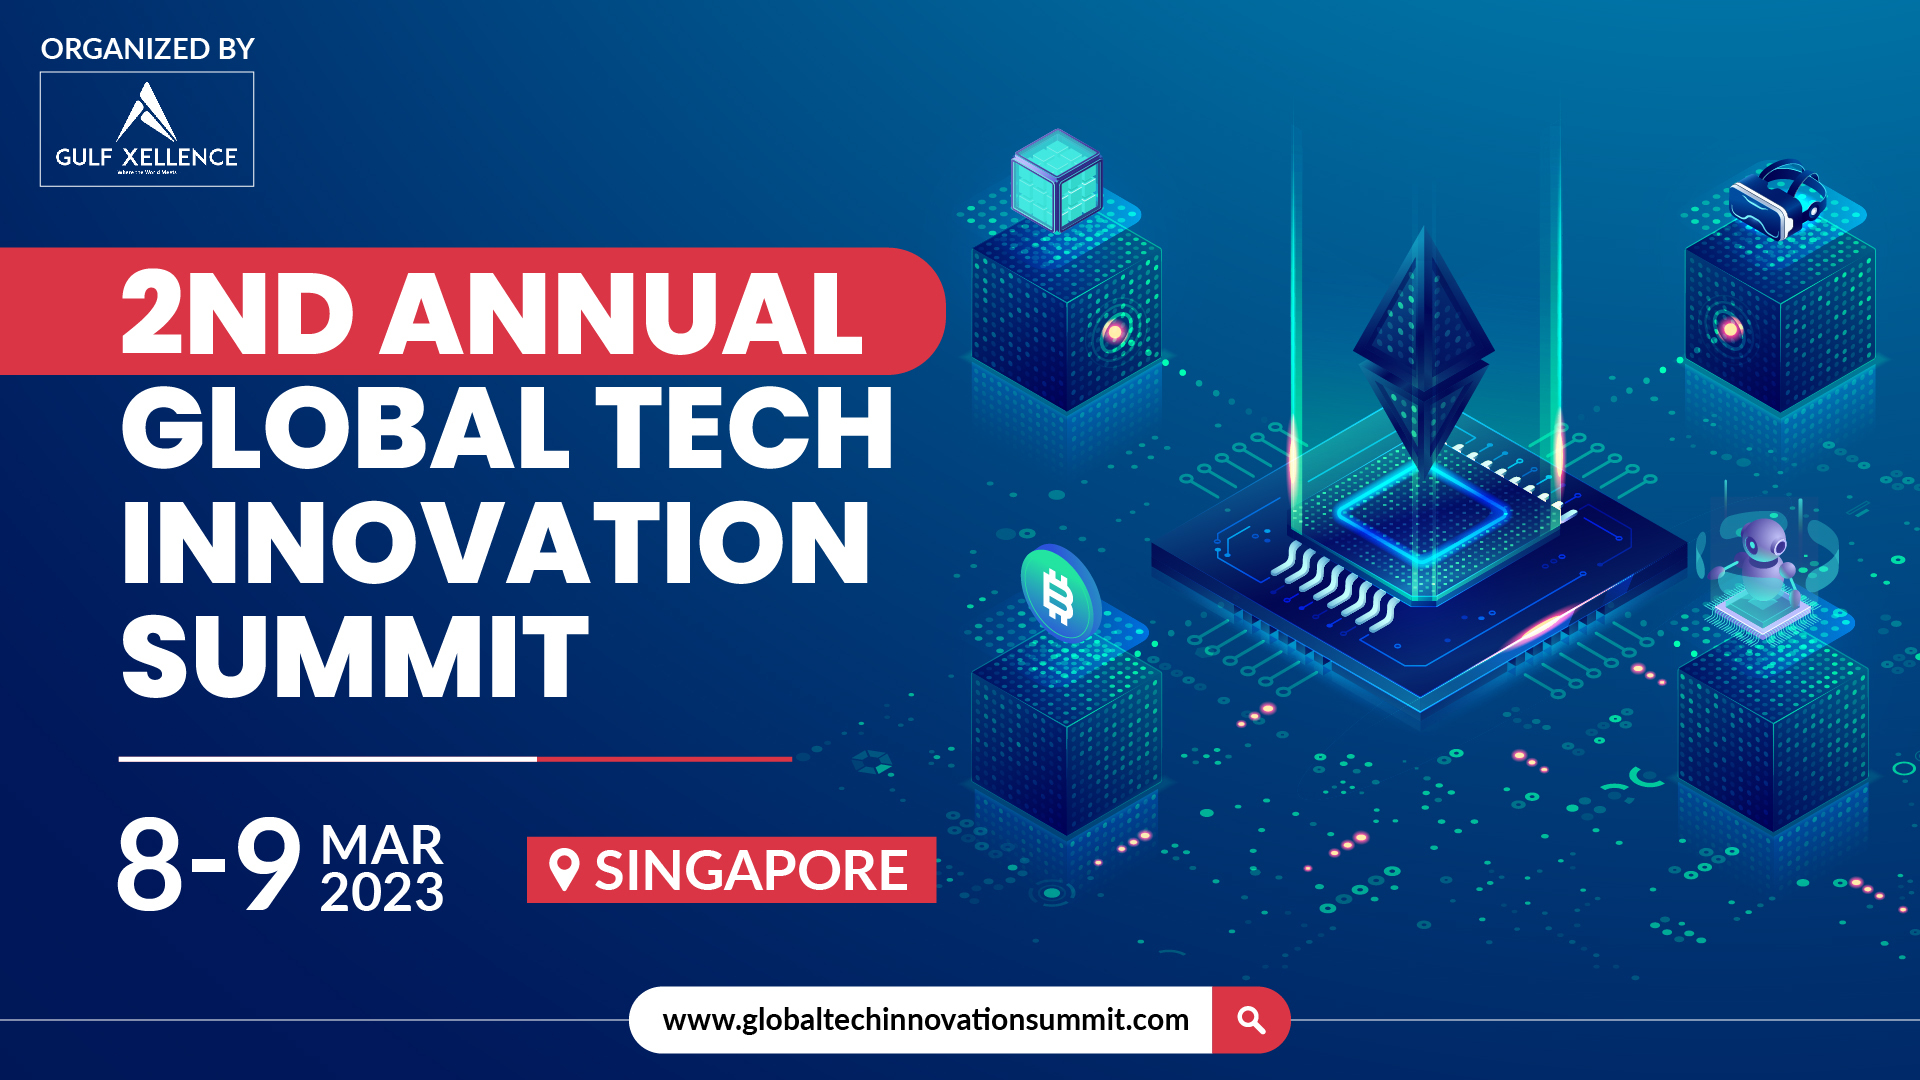 GULF XELLENCE ANNOUNCES THE MUCH-AWAITED ANNUAL “GLOBAL TECH INNOVATION SUMMIT & AWARDS” ON 8TH & 9TH ¬MARCH 2023 IN SINGAPORE